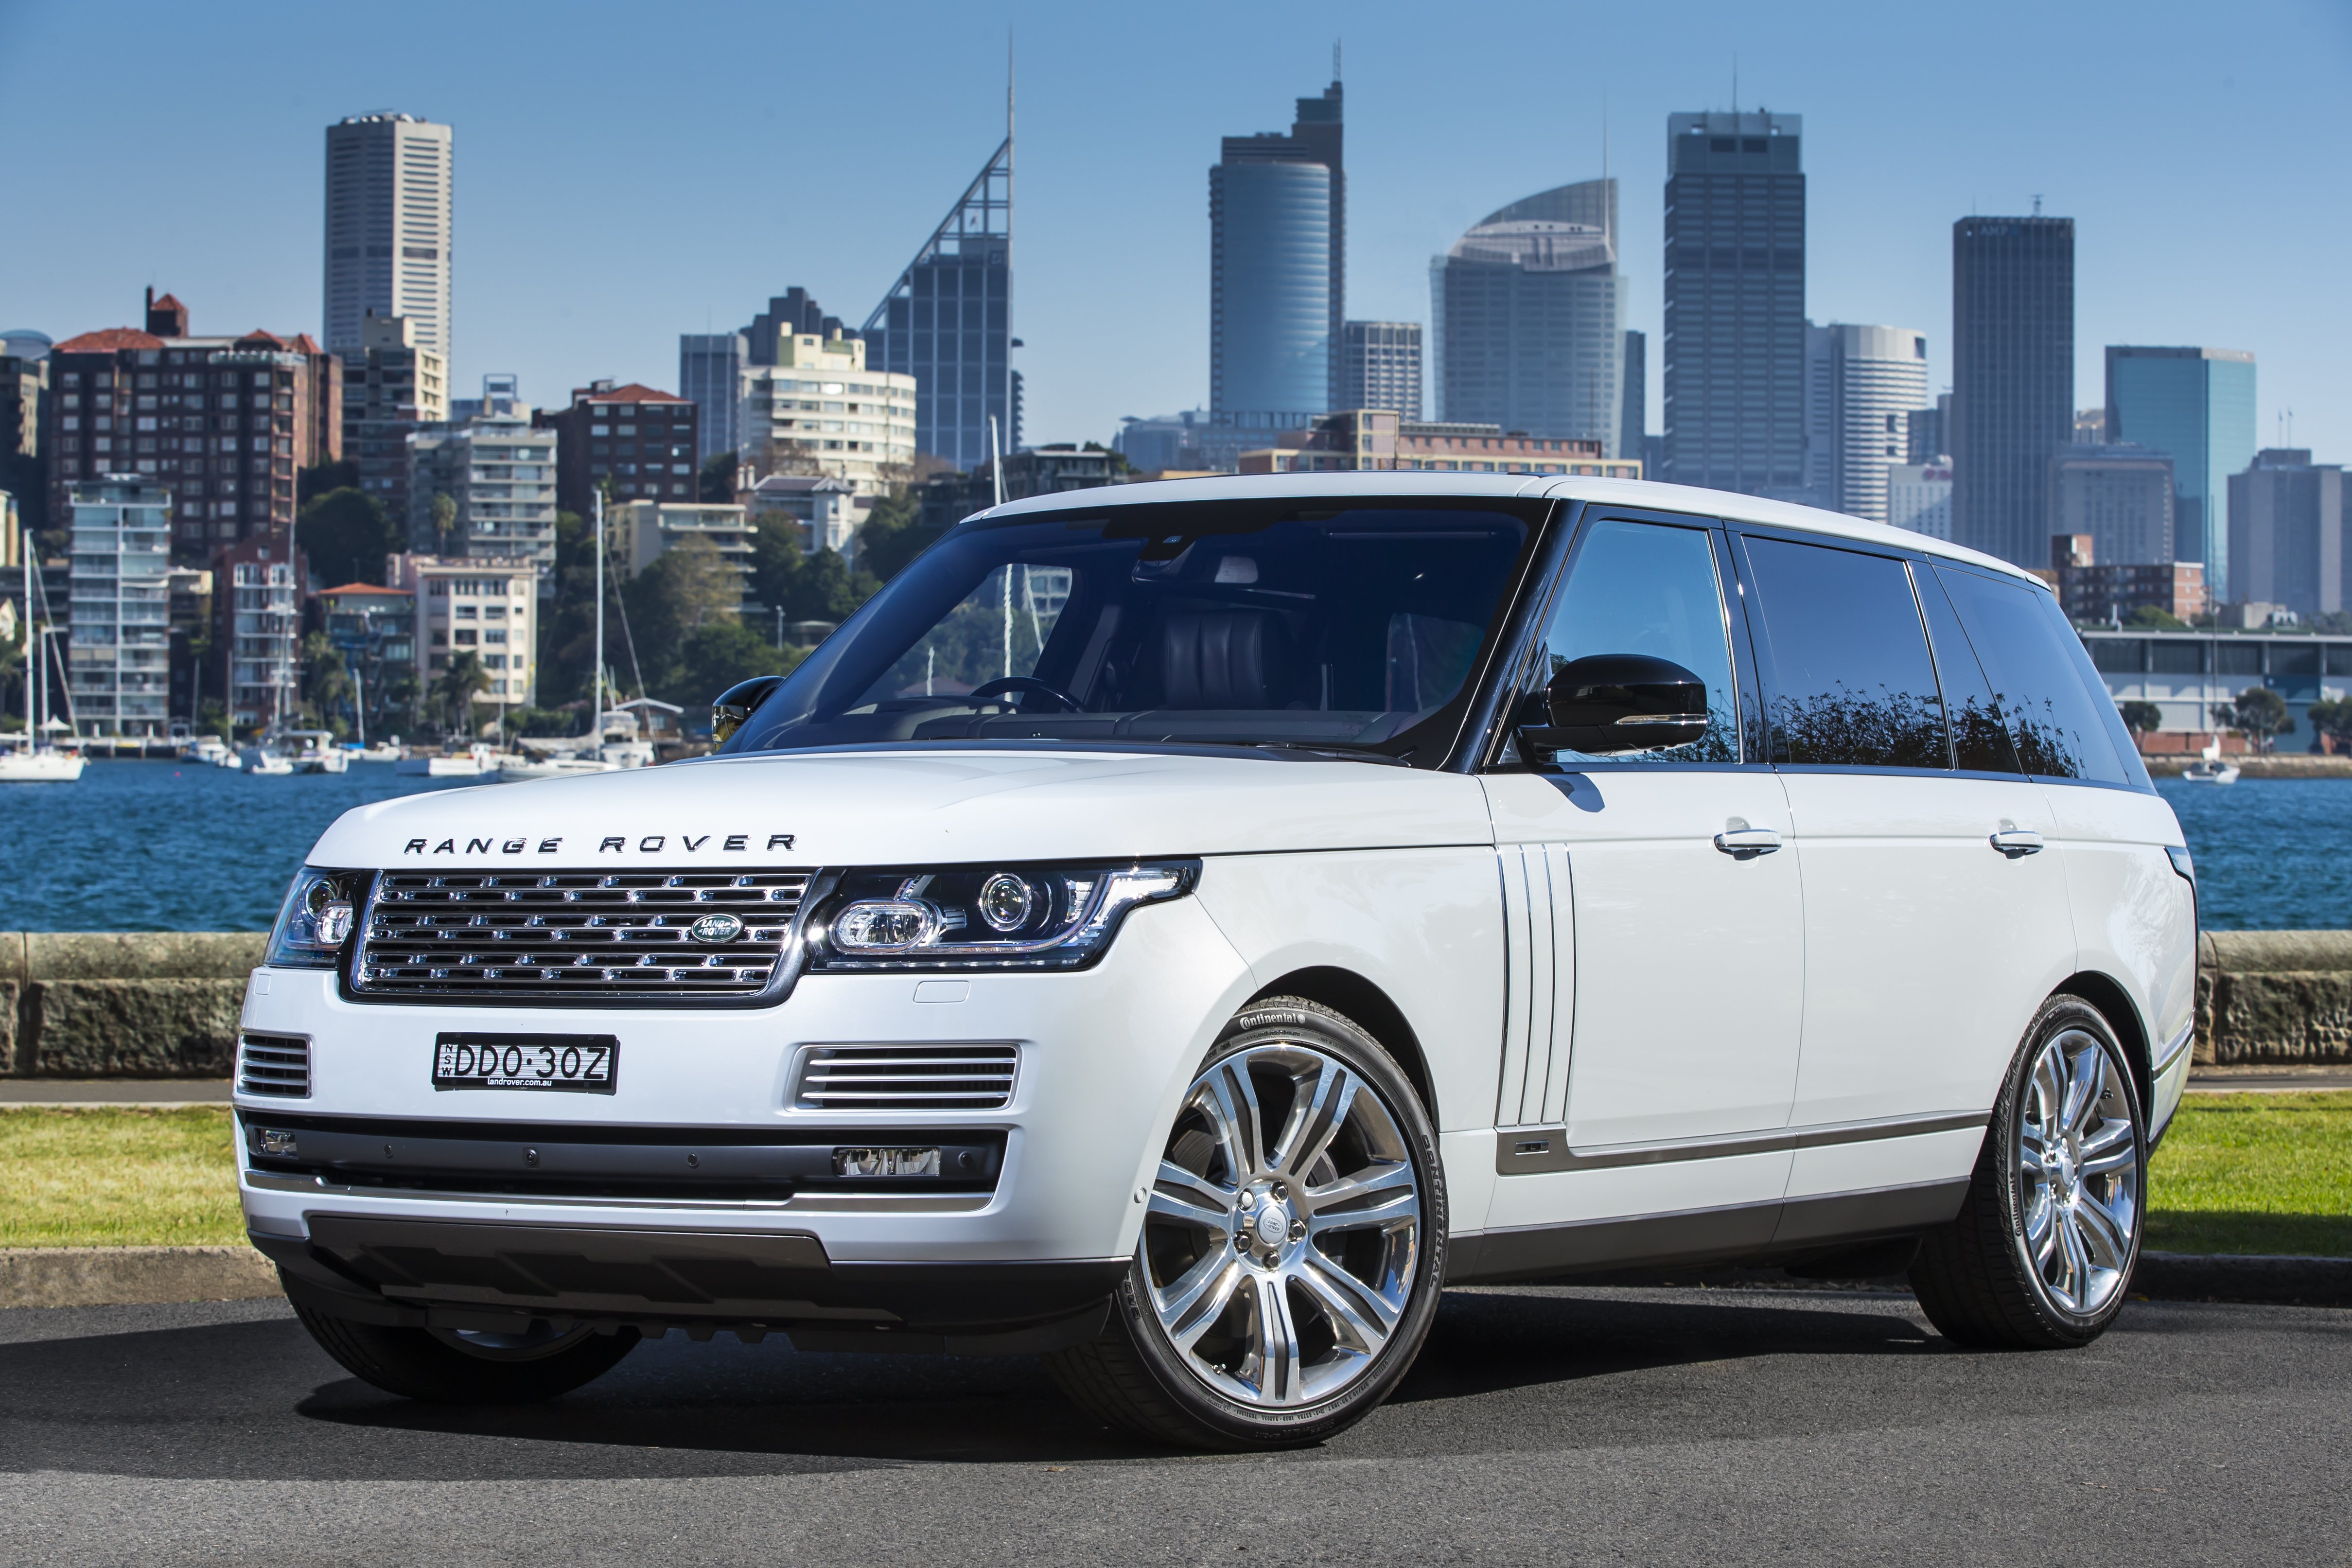 Land Rover Range Rover Sport exterior restyling